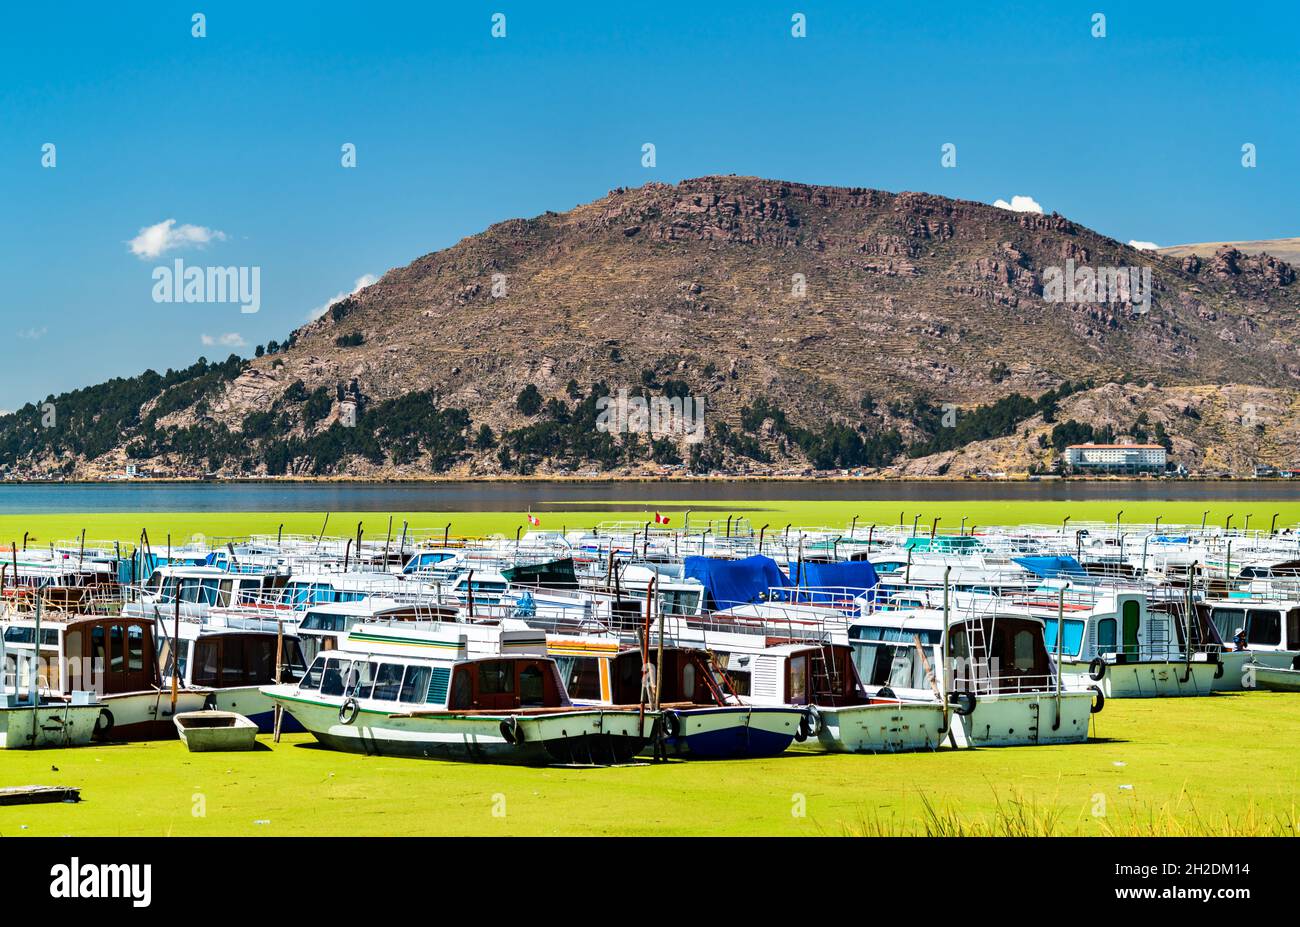 Boats docked at Puno on Lake Titicaca in Peru Stock Photo